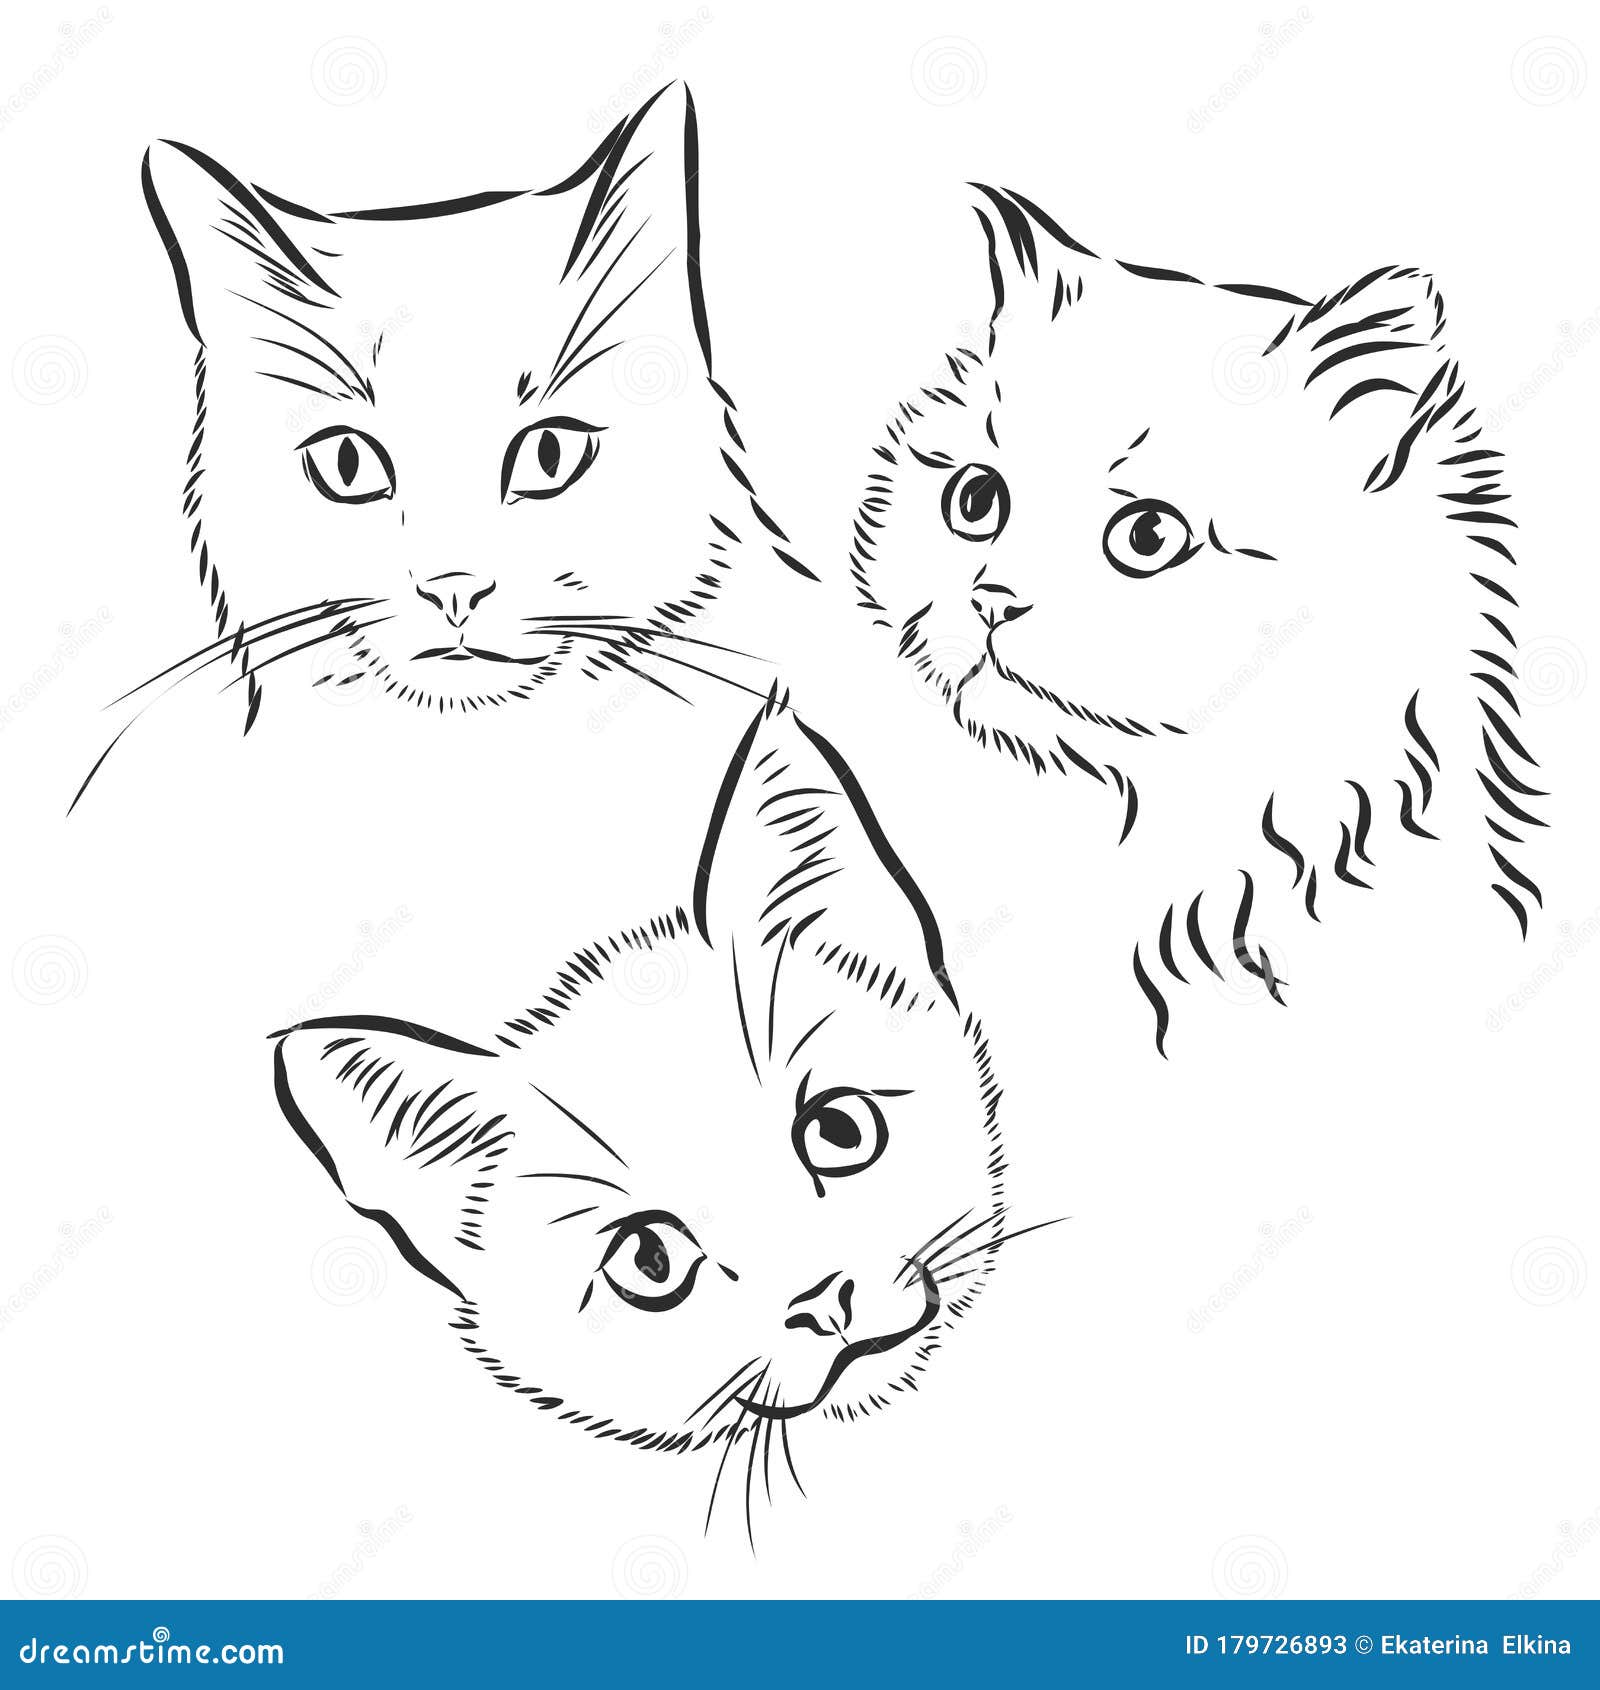 Cute Cat Black And White Sketch Style Greeting Card Download Free Vectors Clipart Graphics Vector Art